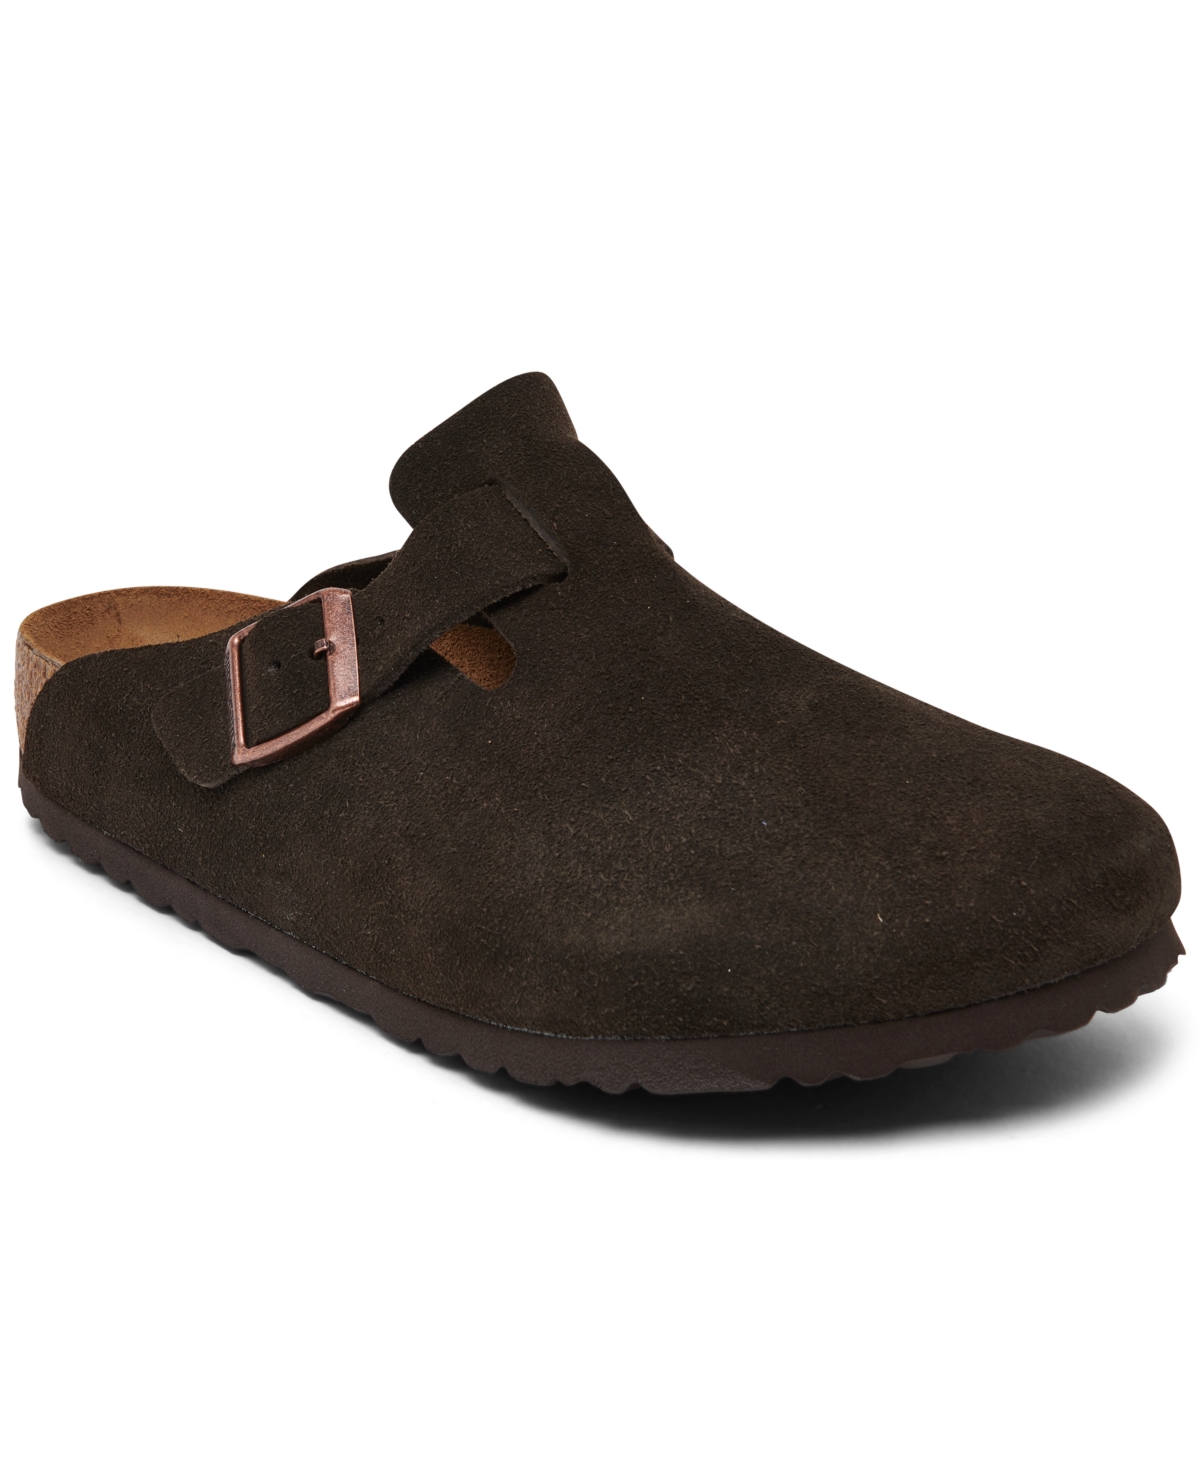 BIRKENSTOCK MEN'S BOSTON SOFT FOOTBED SUEDE LEATHER CLOGS FROM FINISH LINE